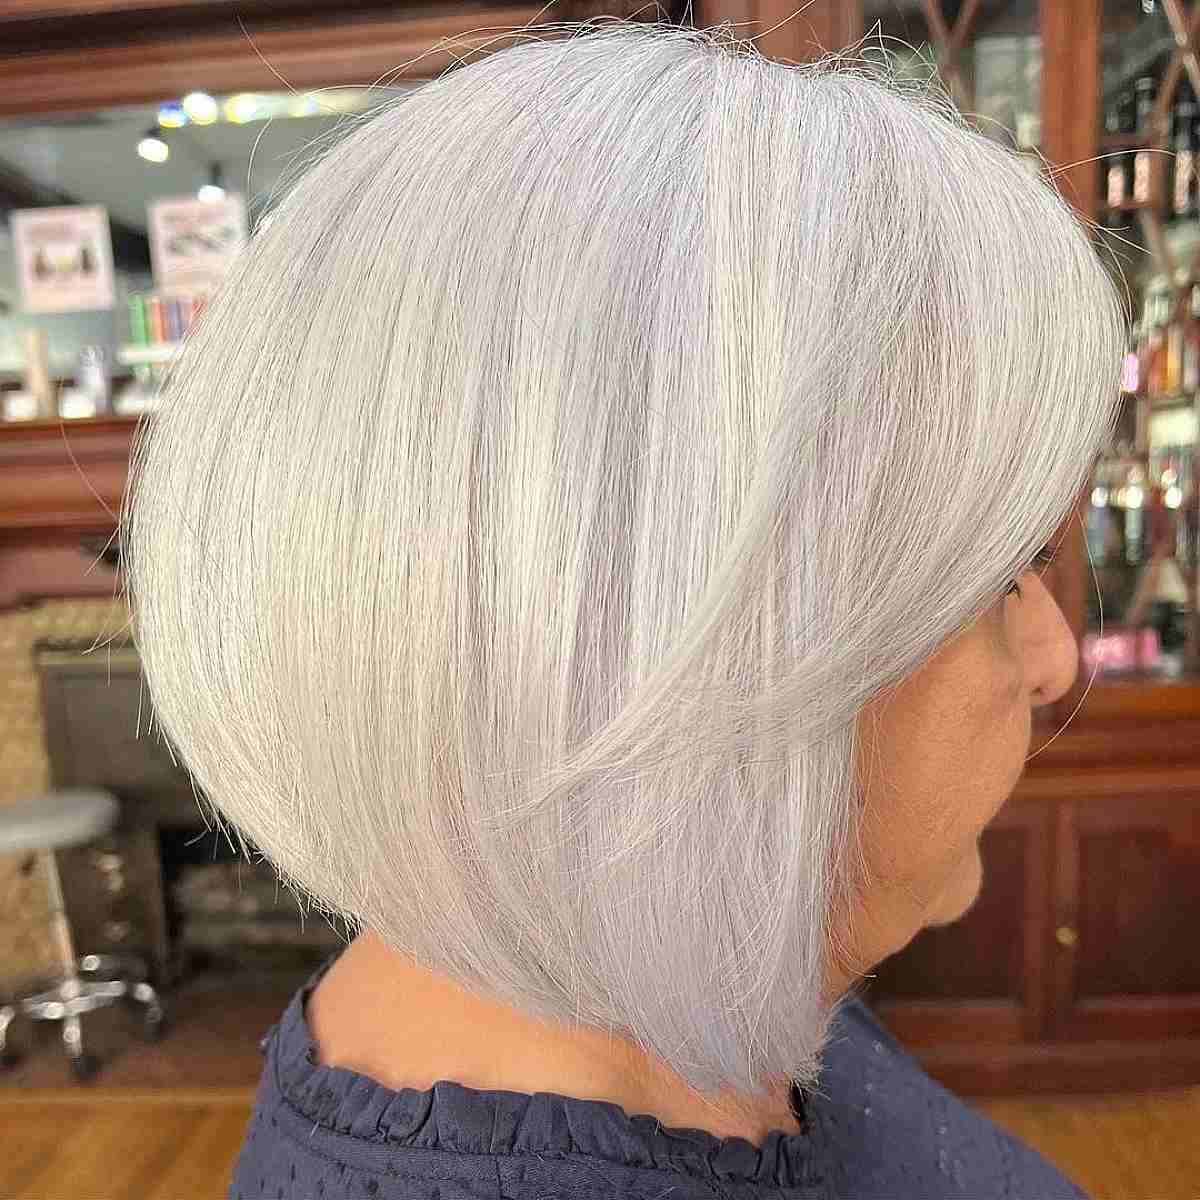 Short Round Haircut with Platinum Blonde Color for Older Women